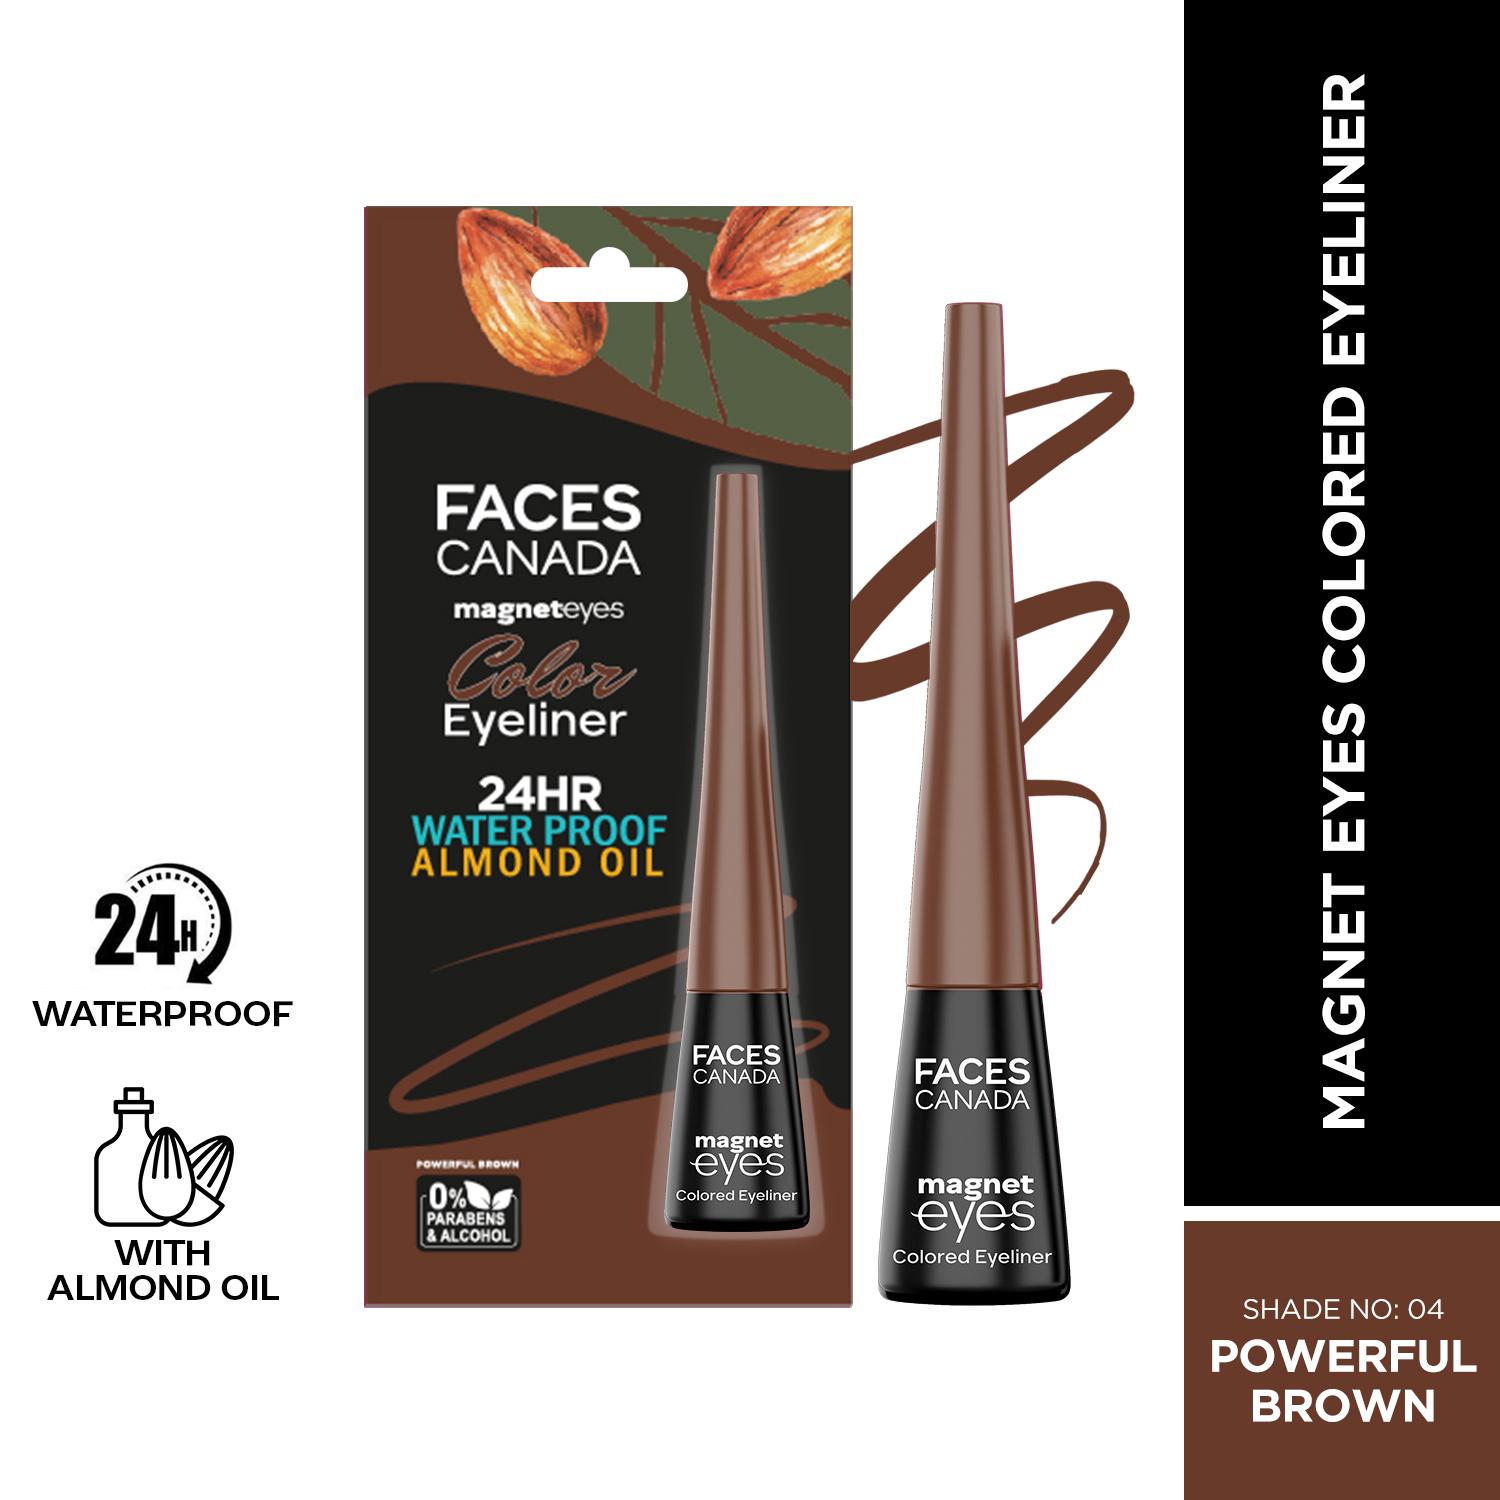 Faces Canada | Faces Canada Magneteyes Color Eyeliner - Powerful Brown, Glossy Finish, 24HR Long-lasting (4 ml)